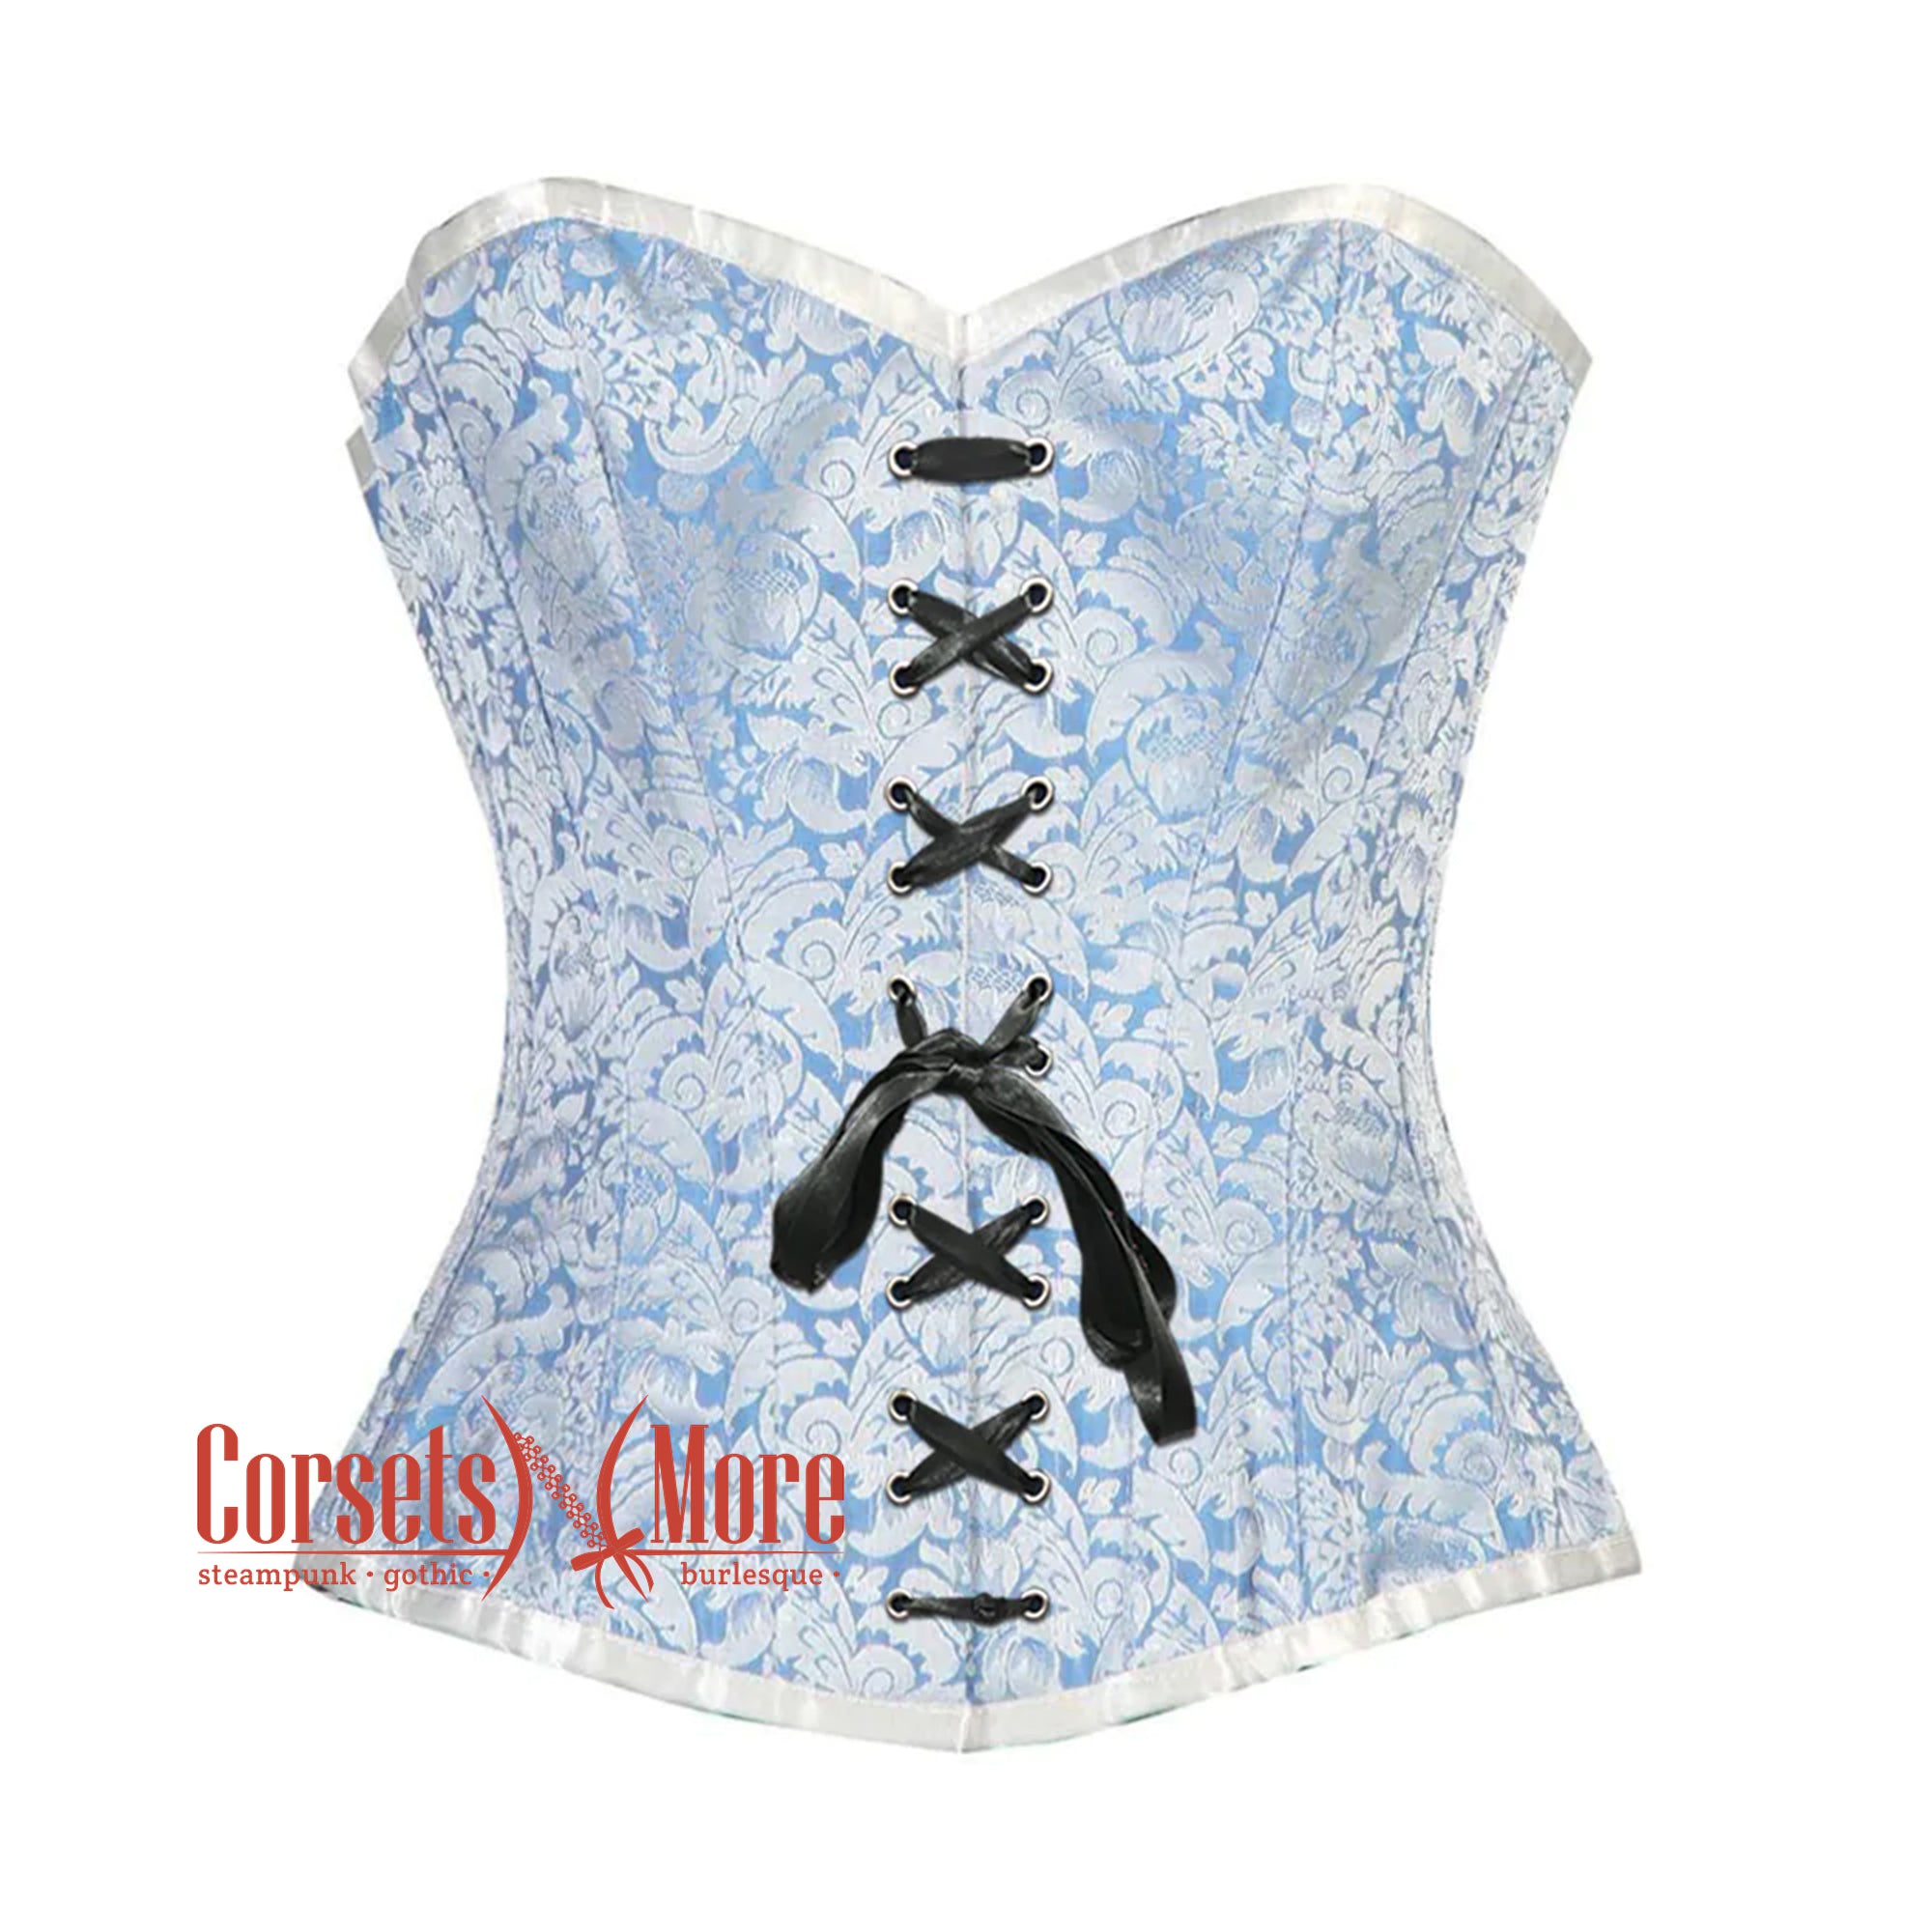 Pin on bustier burlesque